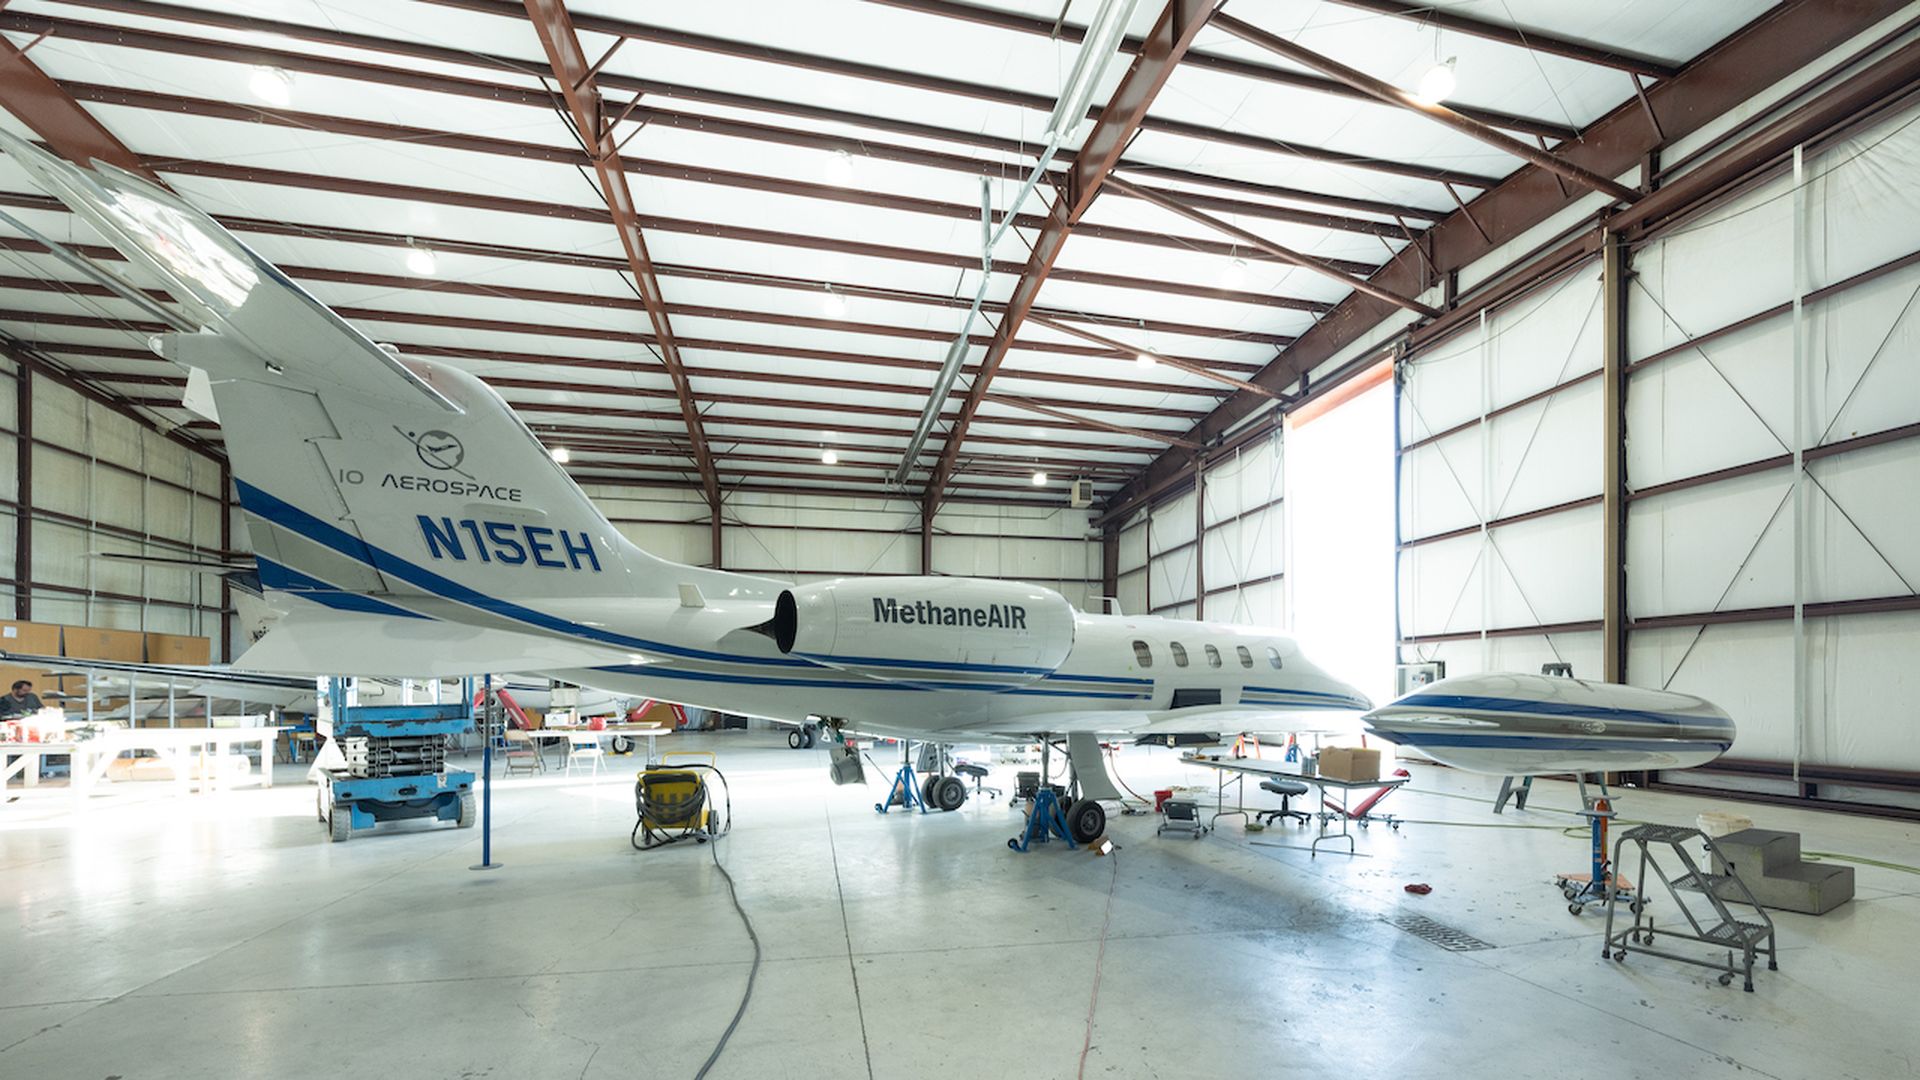 MethaneAIR's emissions-tracking airplane rests in a hangar in Kansas.